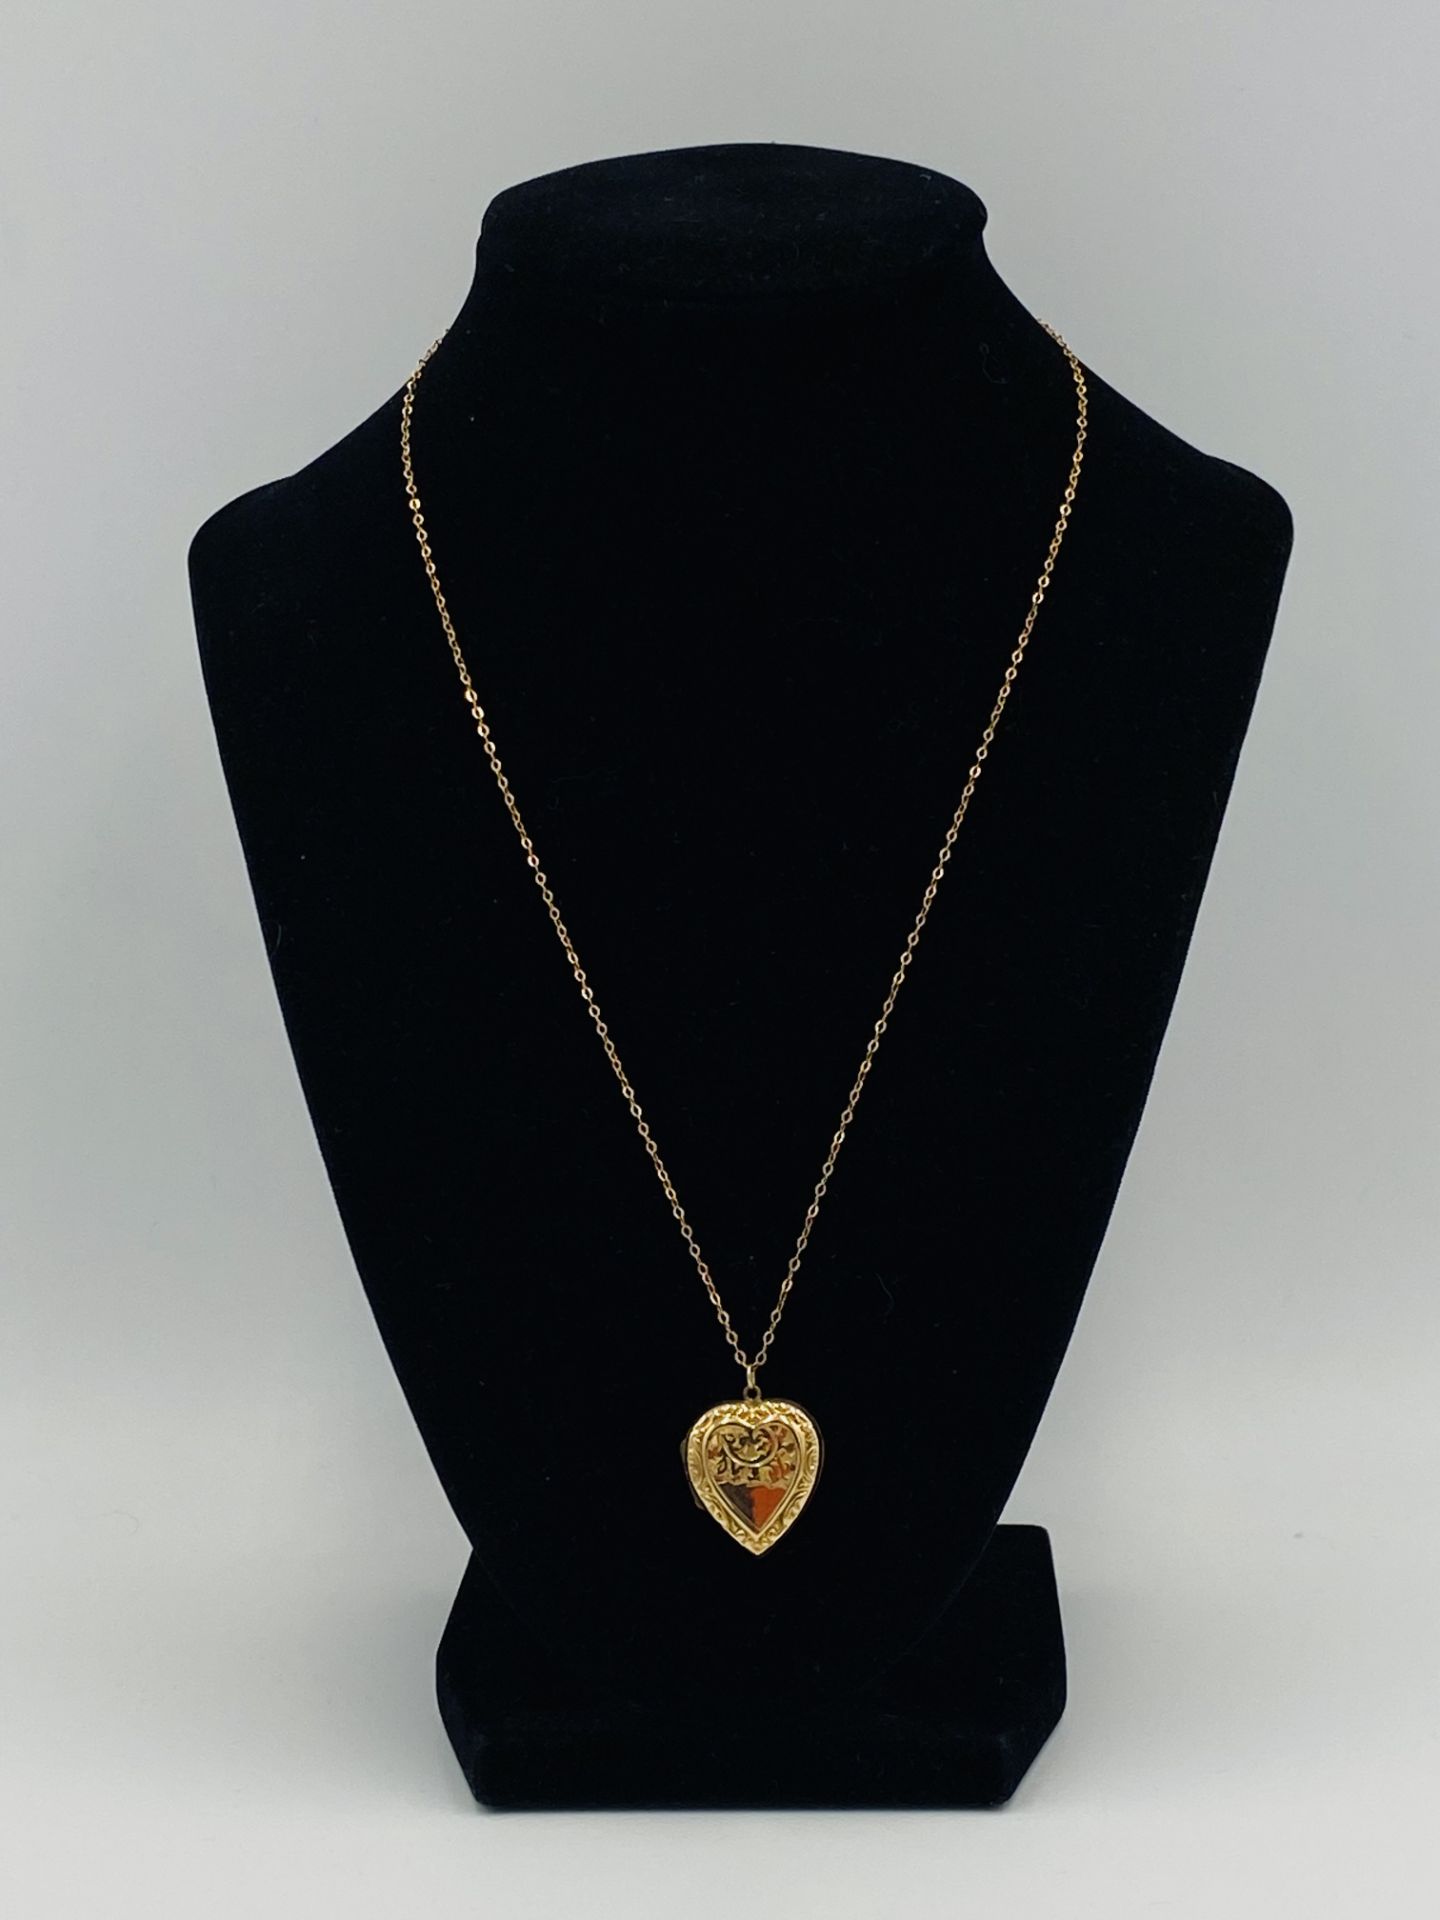 9ct gold heart shaped locket on a 9ct gold chain - Image 3 of 4